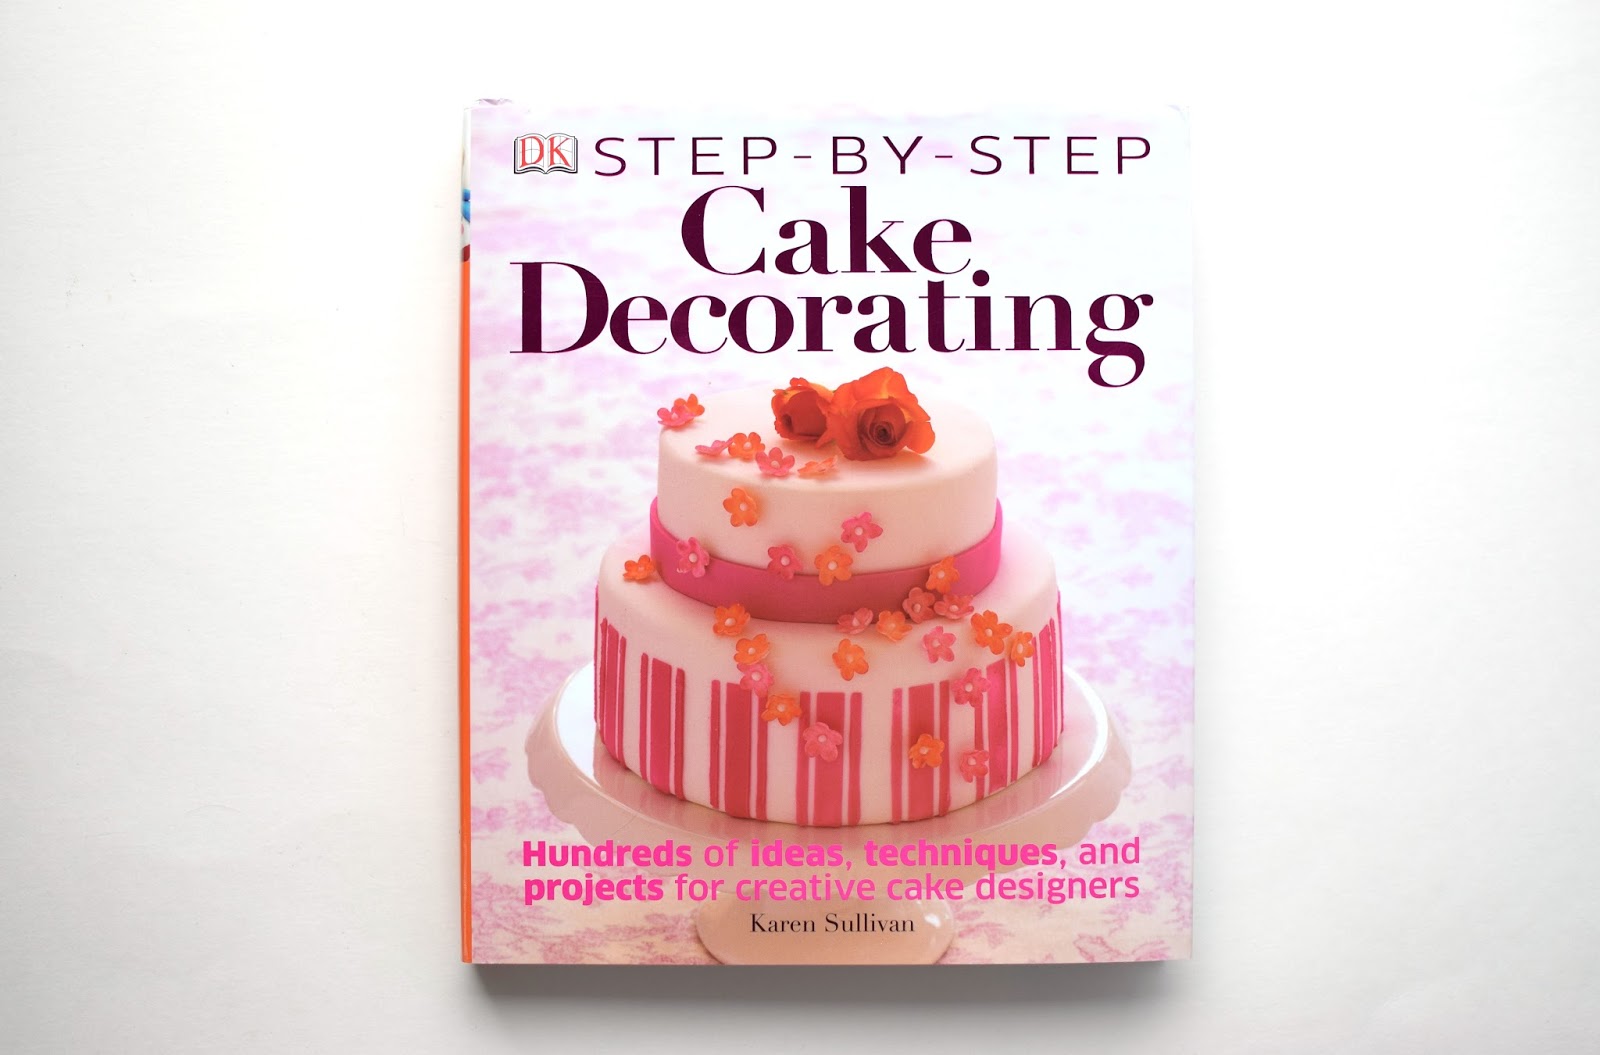 Woman in Real Life: Step-by-Step Cake Decorating (Book Review)